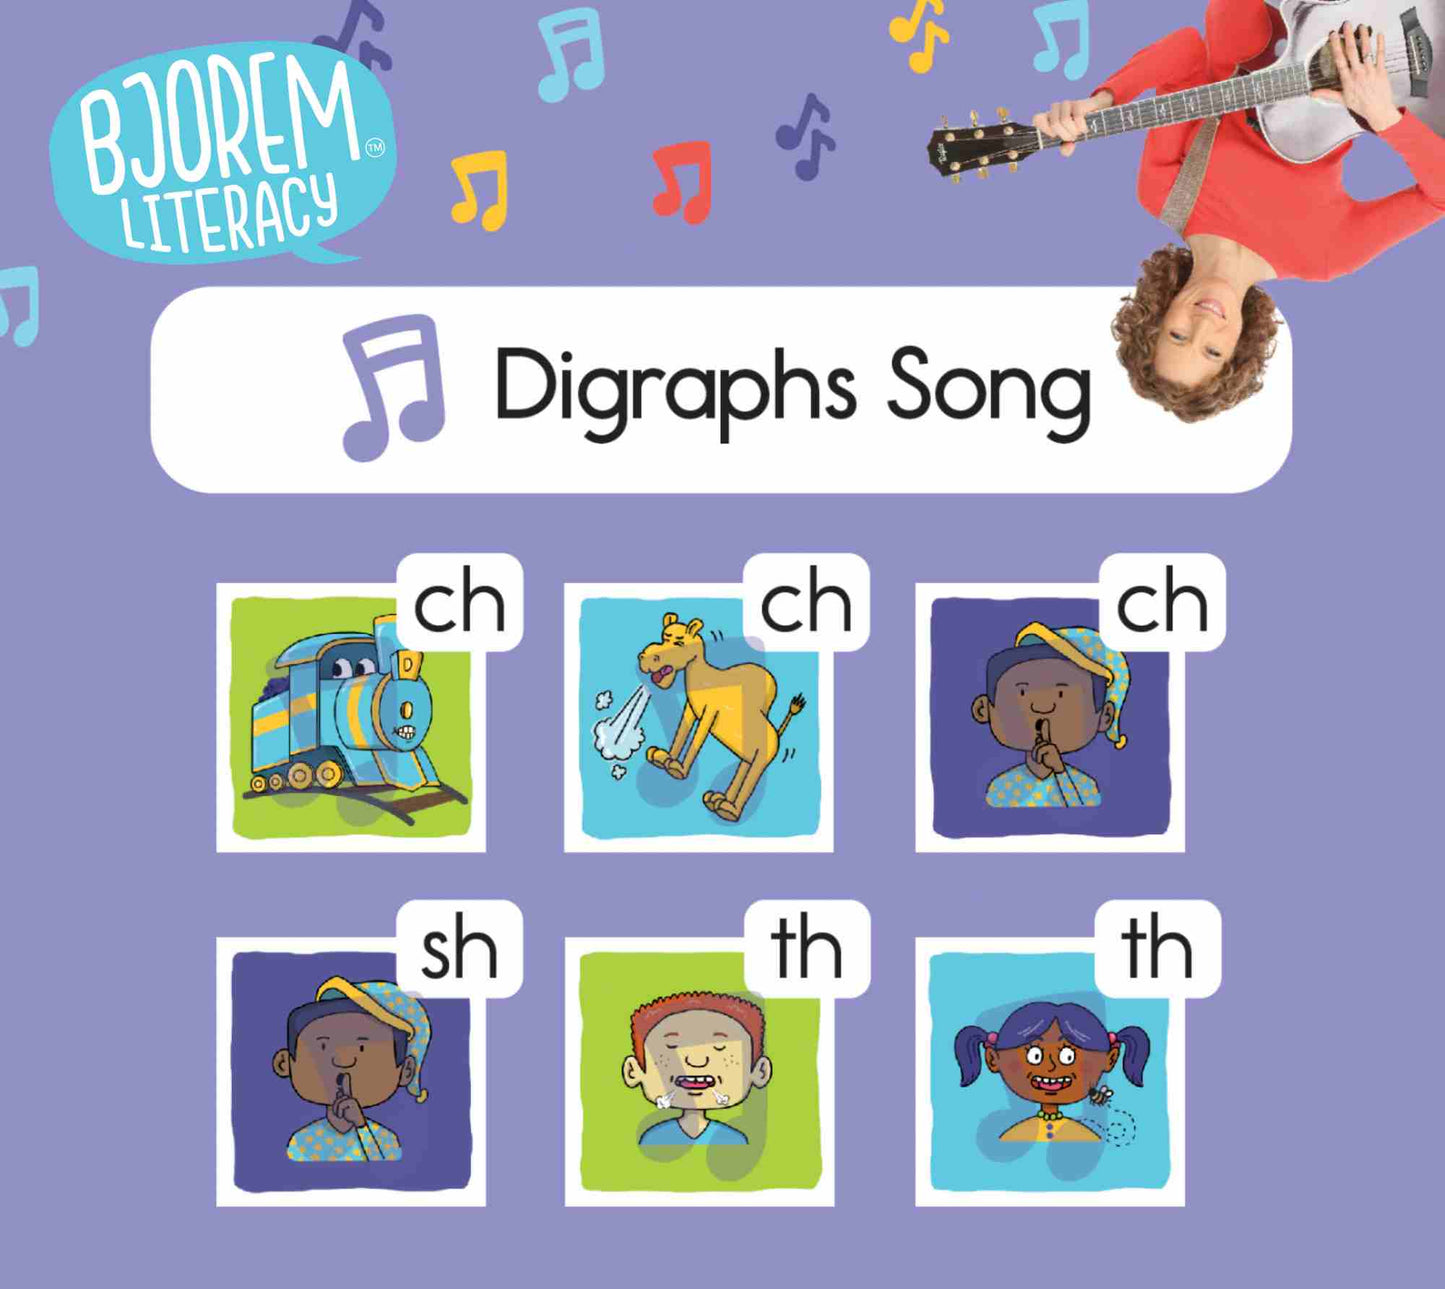 Bjorem Better Letters™ with The Laurie Berkner Band Card Deck